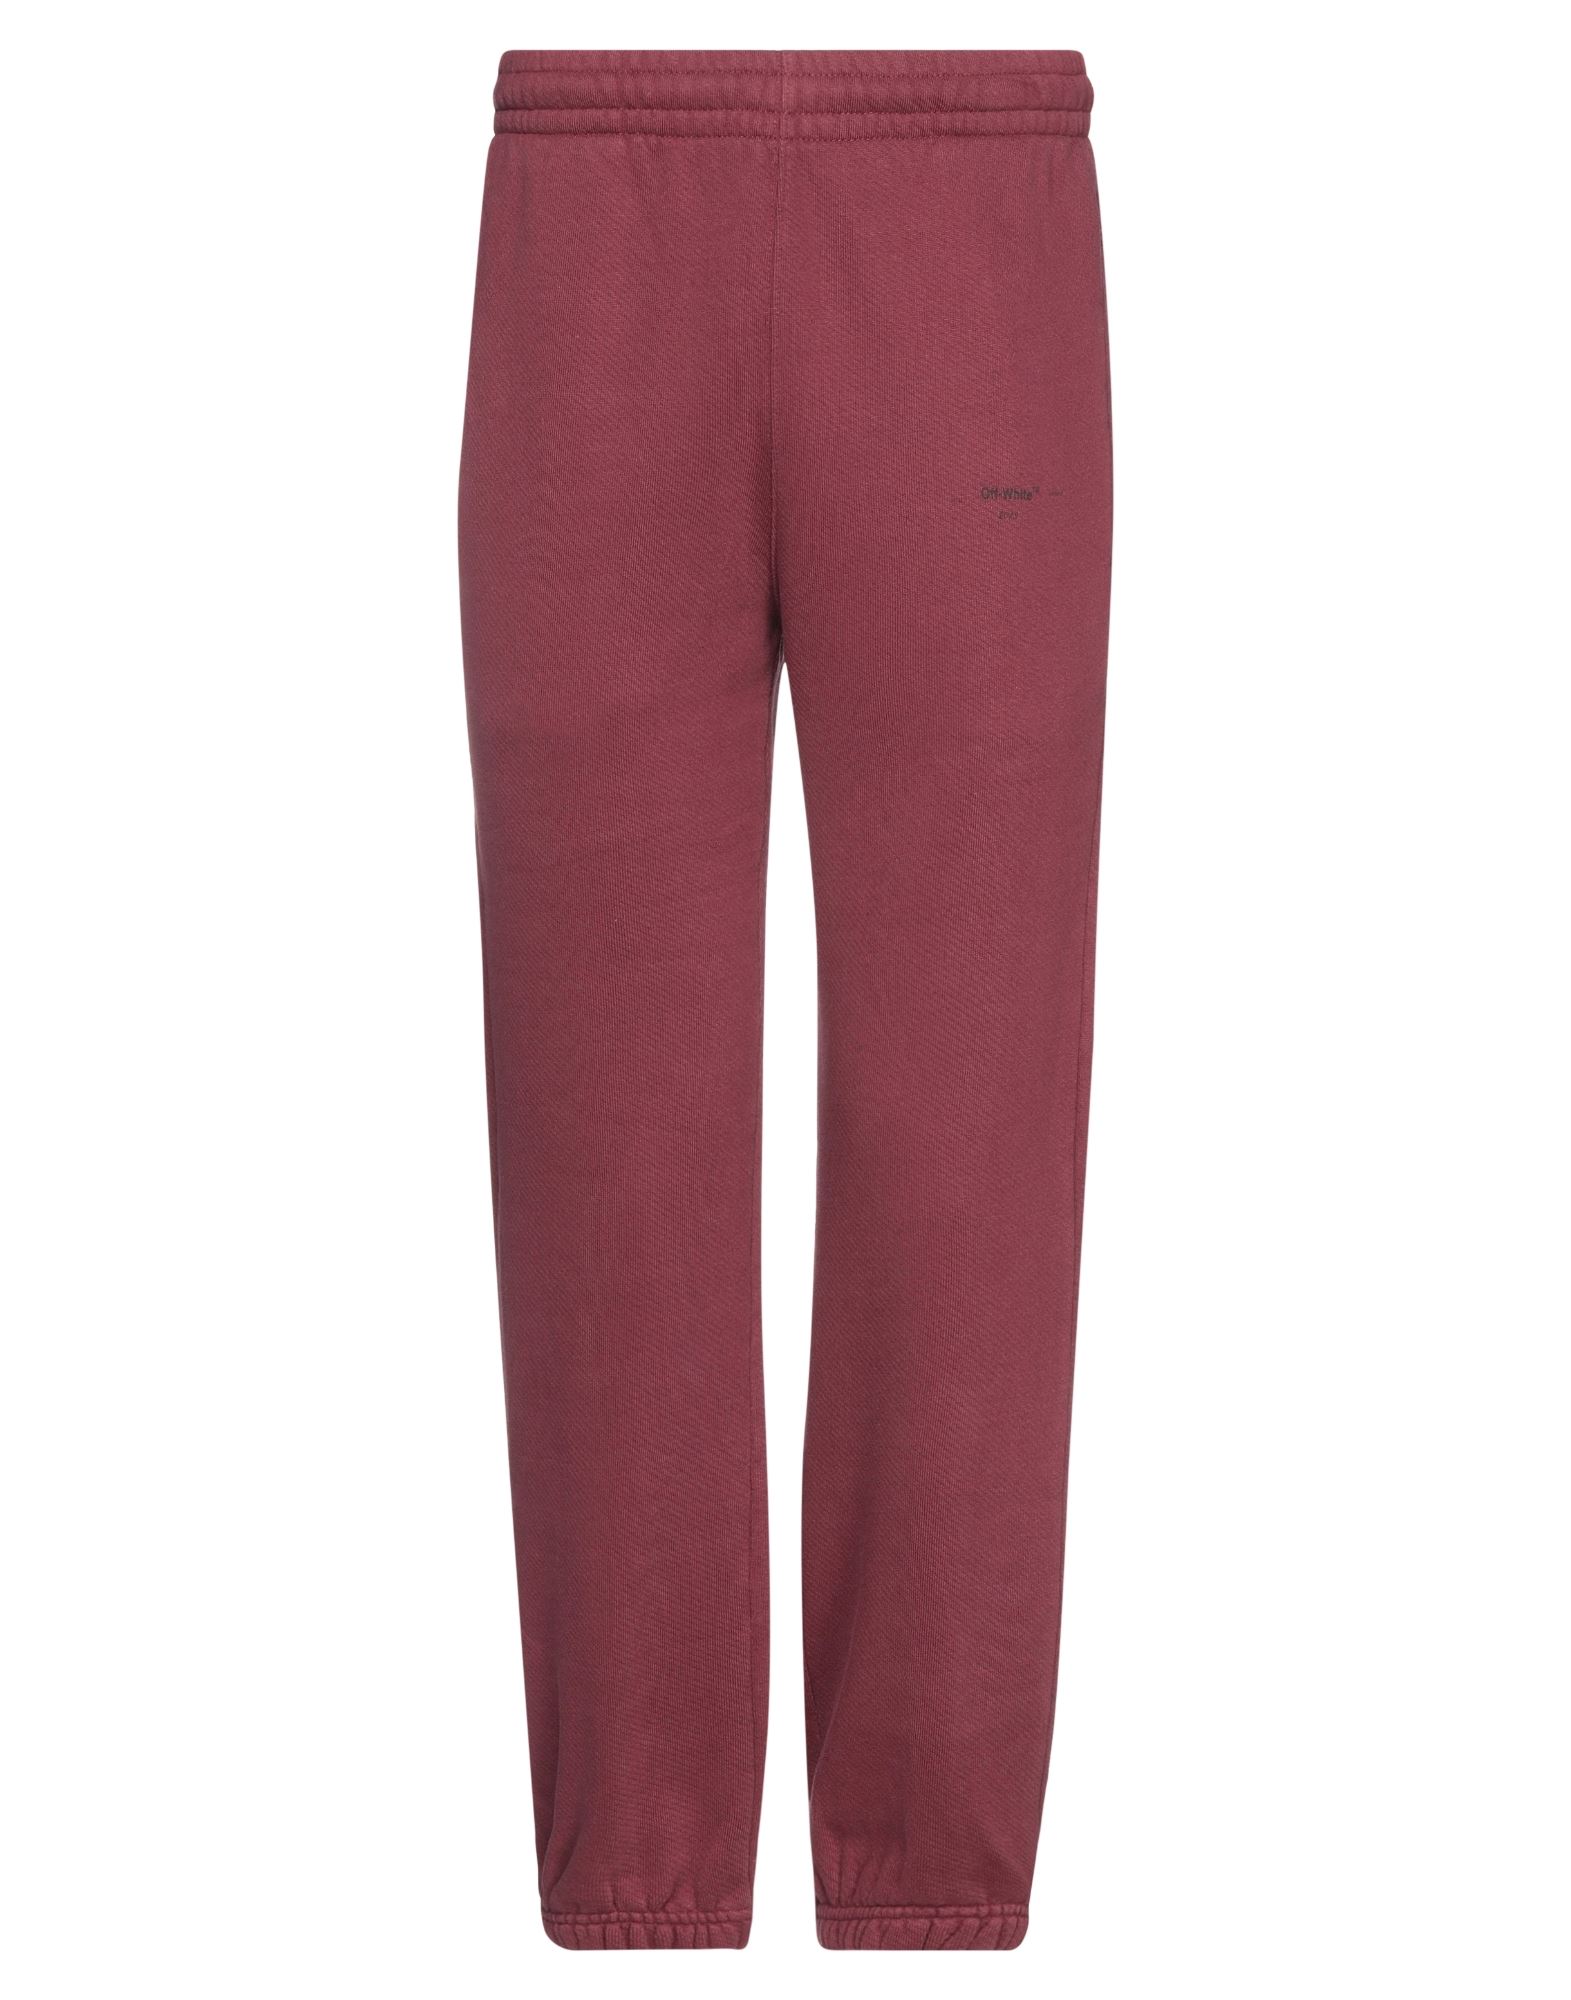 Off-white Man Pants Burgundy Size M Cotton In Maroon